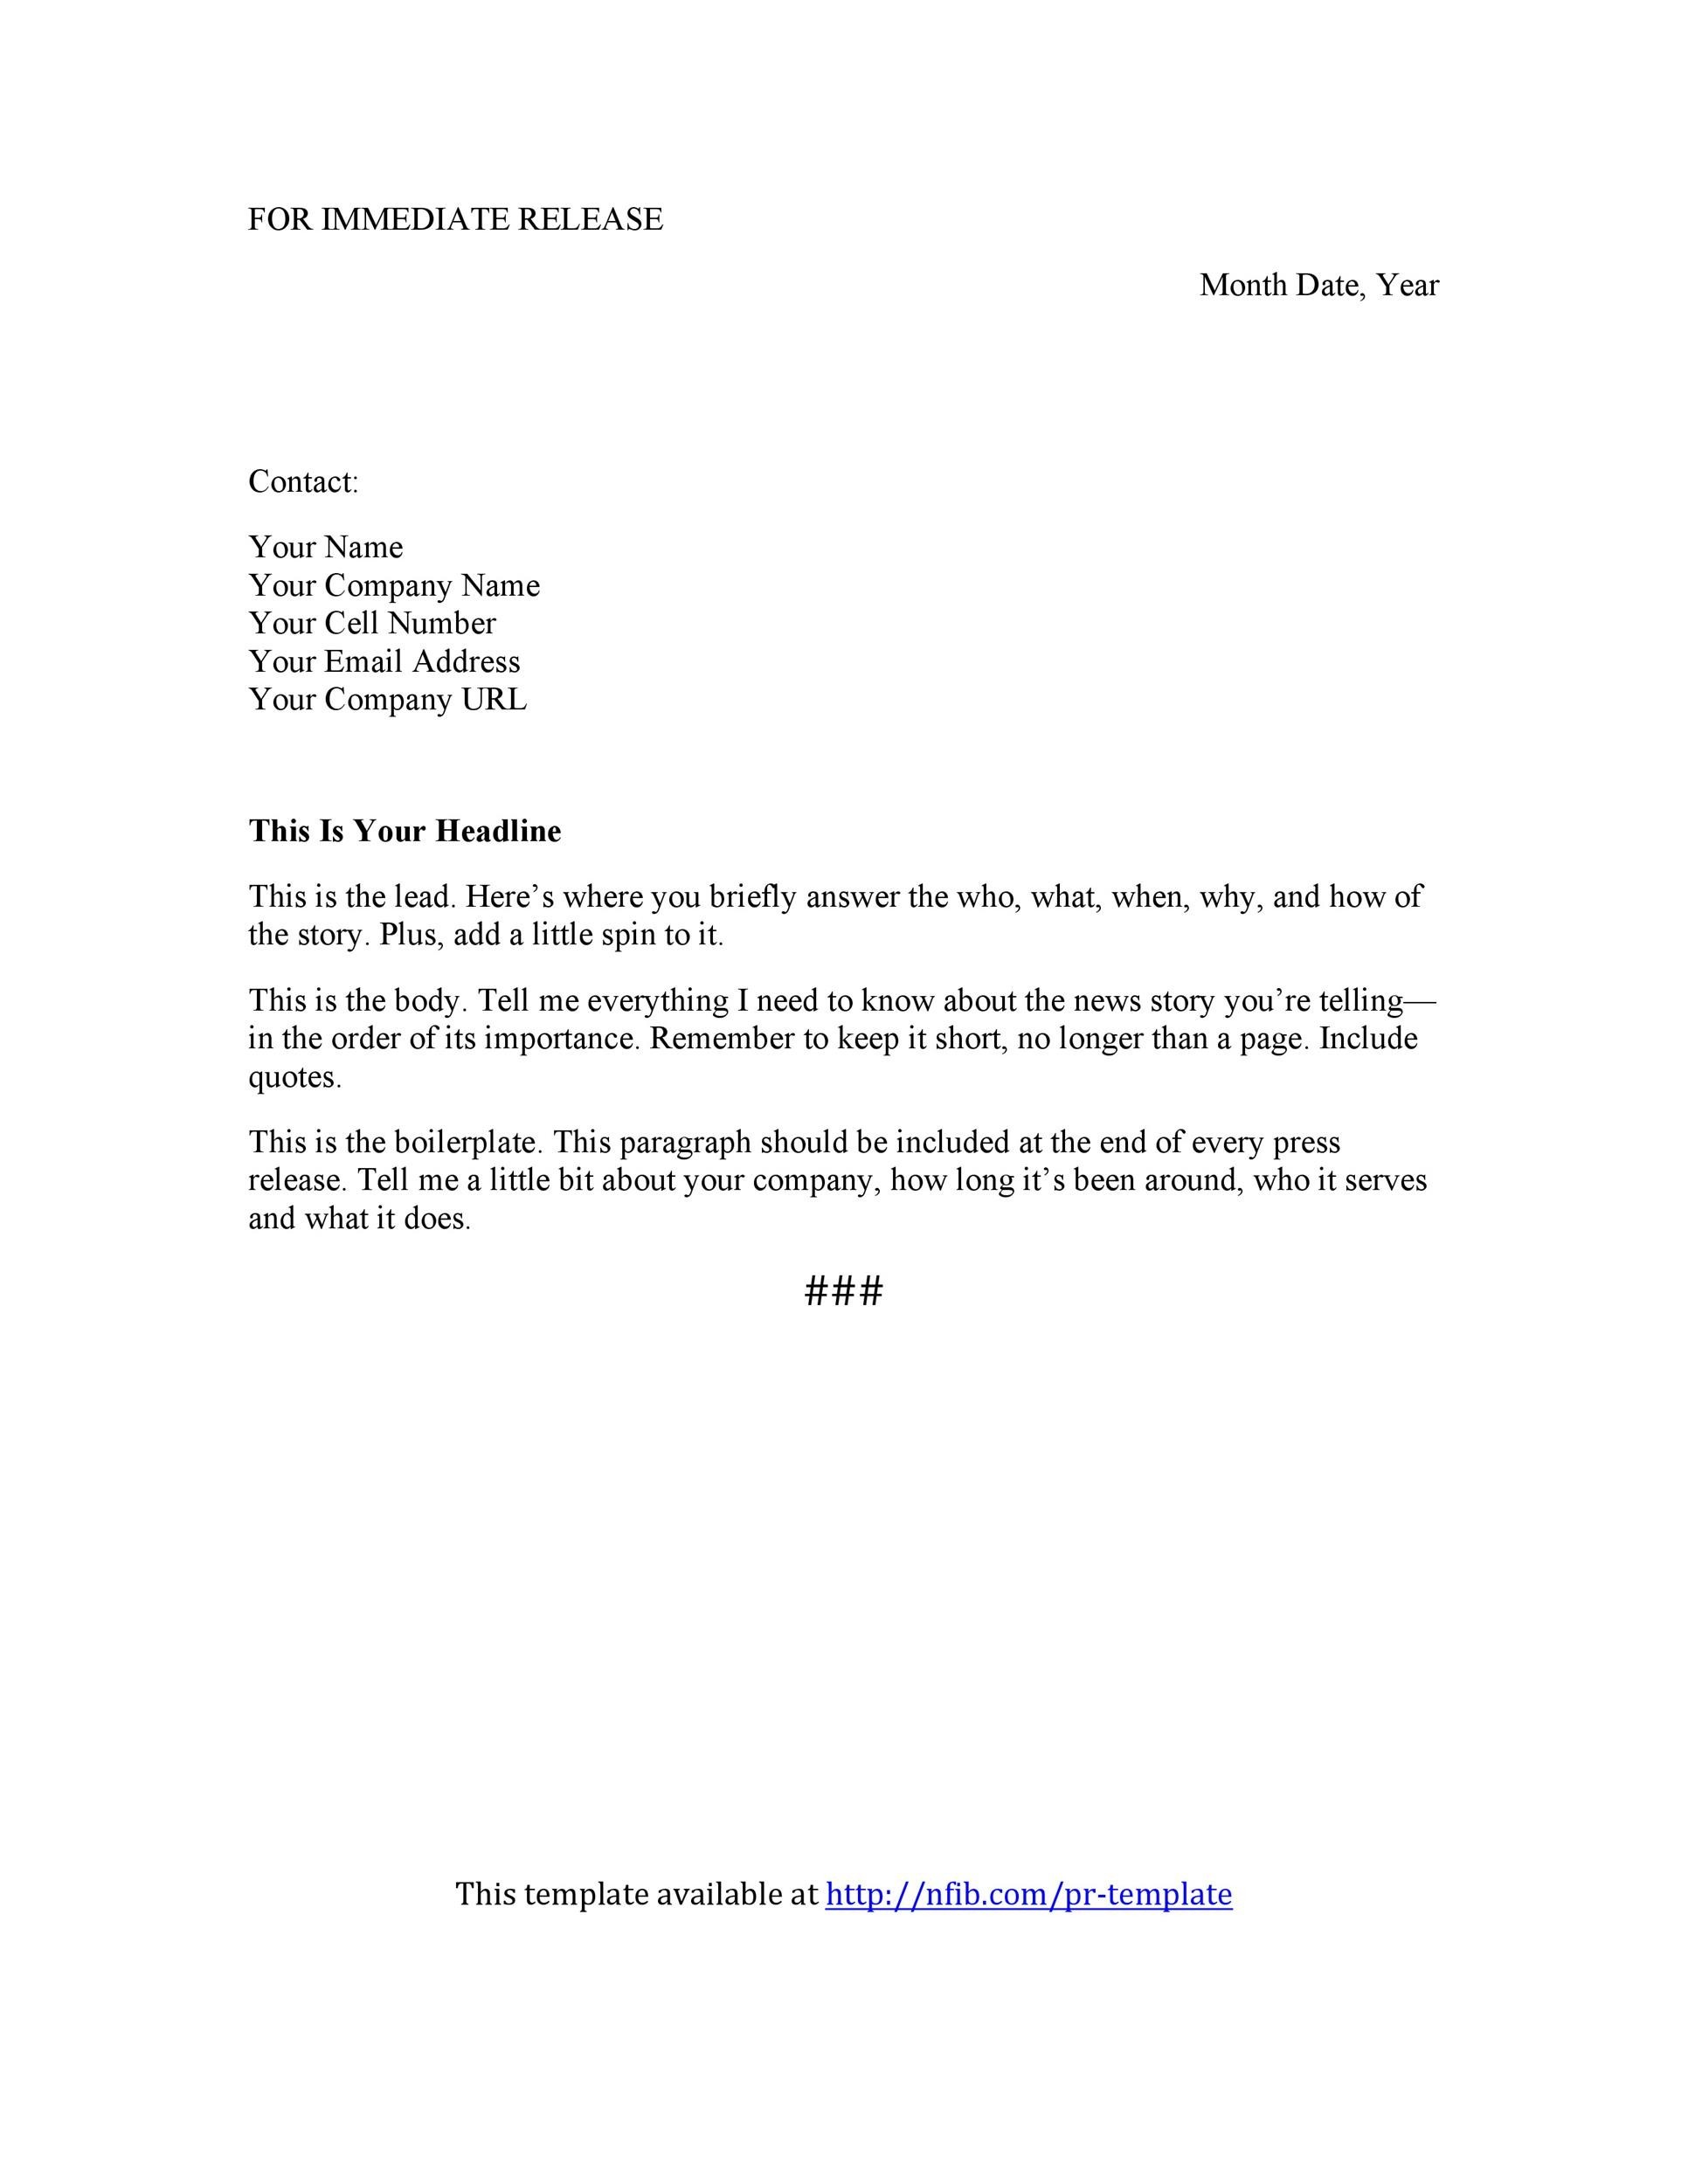 Free Press release template 38